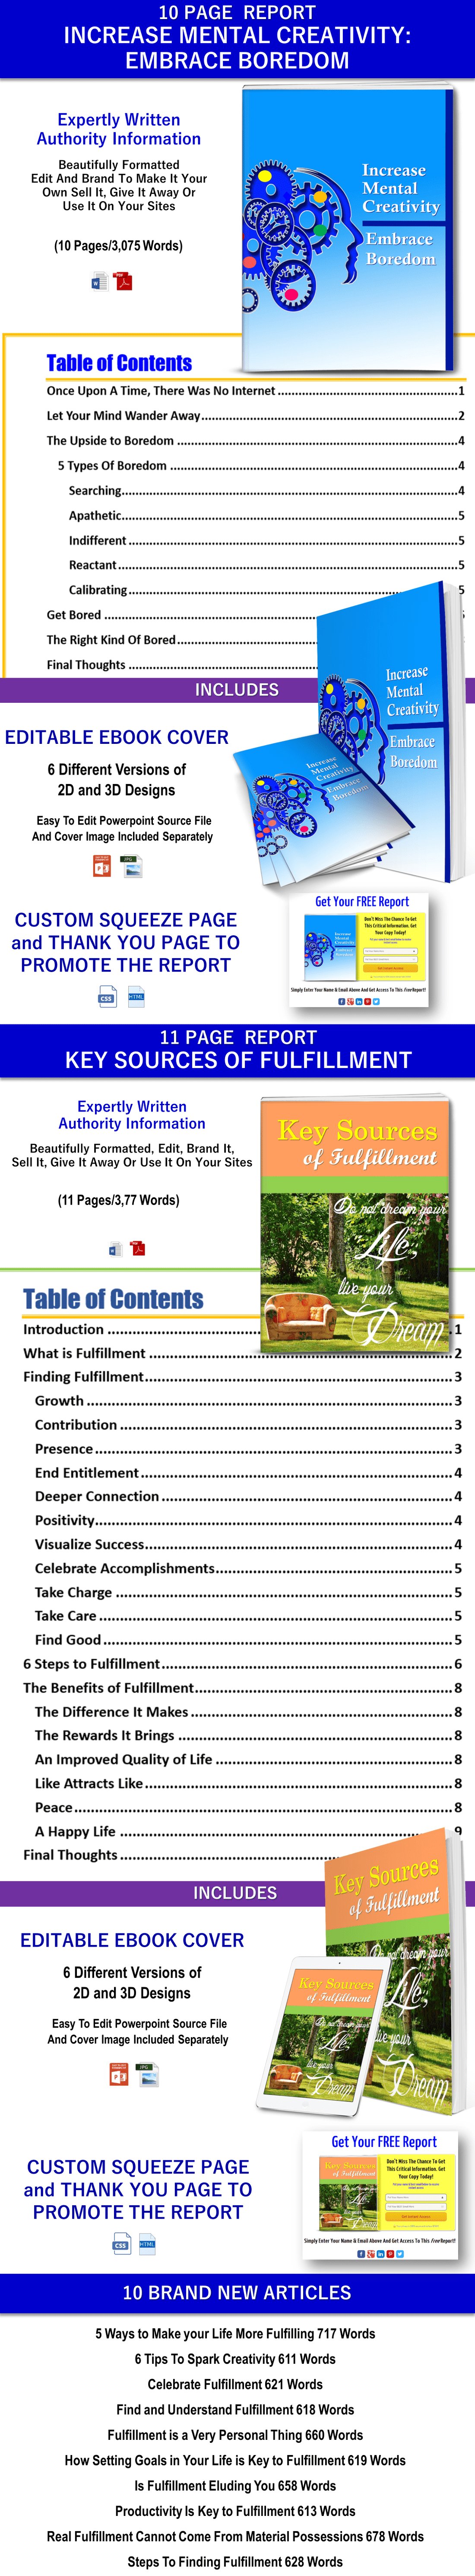 Key Sources of Fulfillment Report, Creativity Report and Articles Private Label Rights